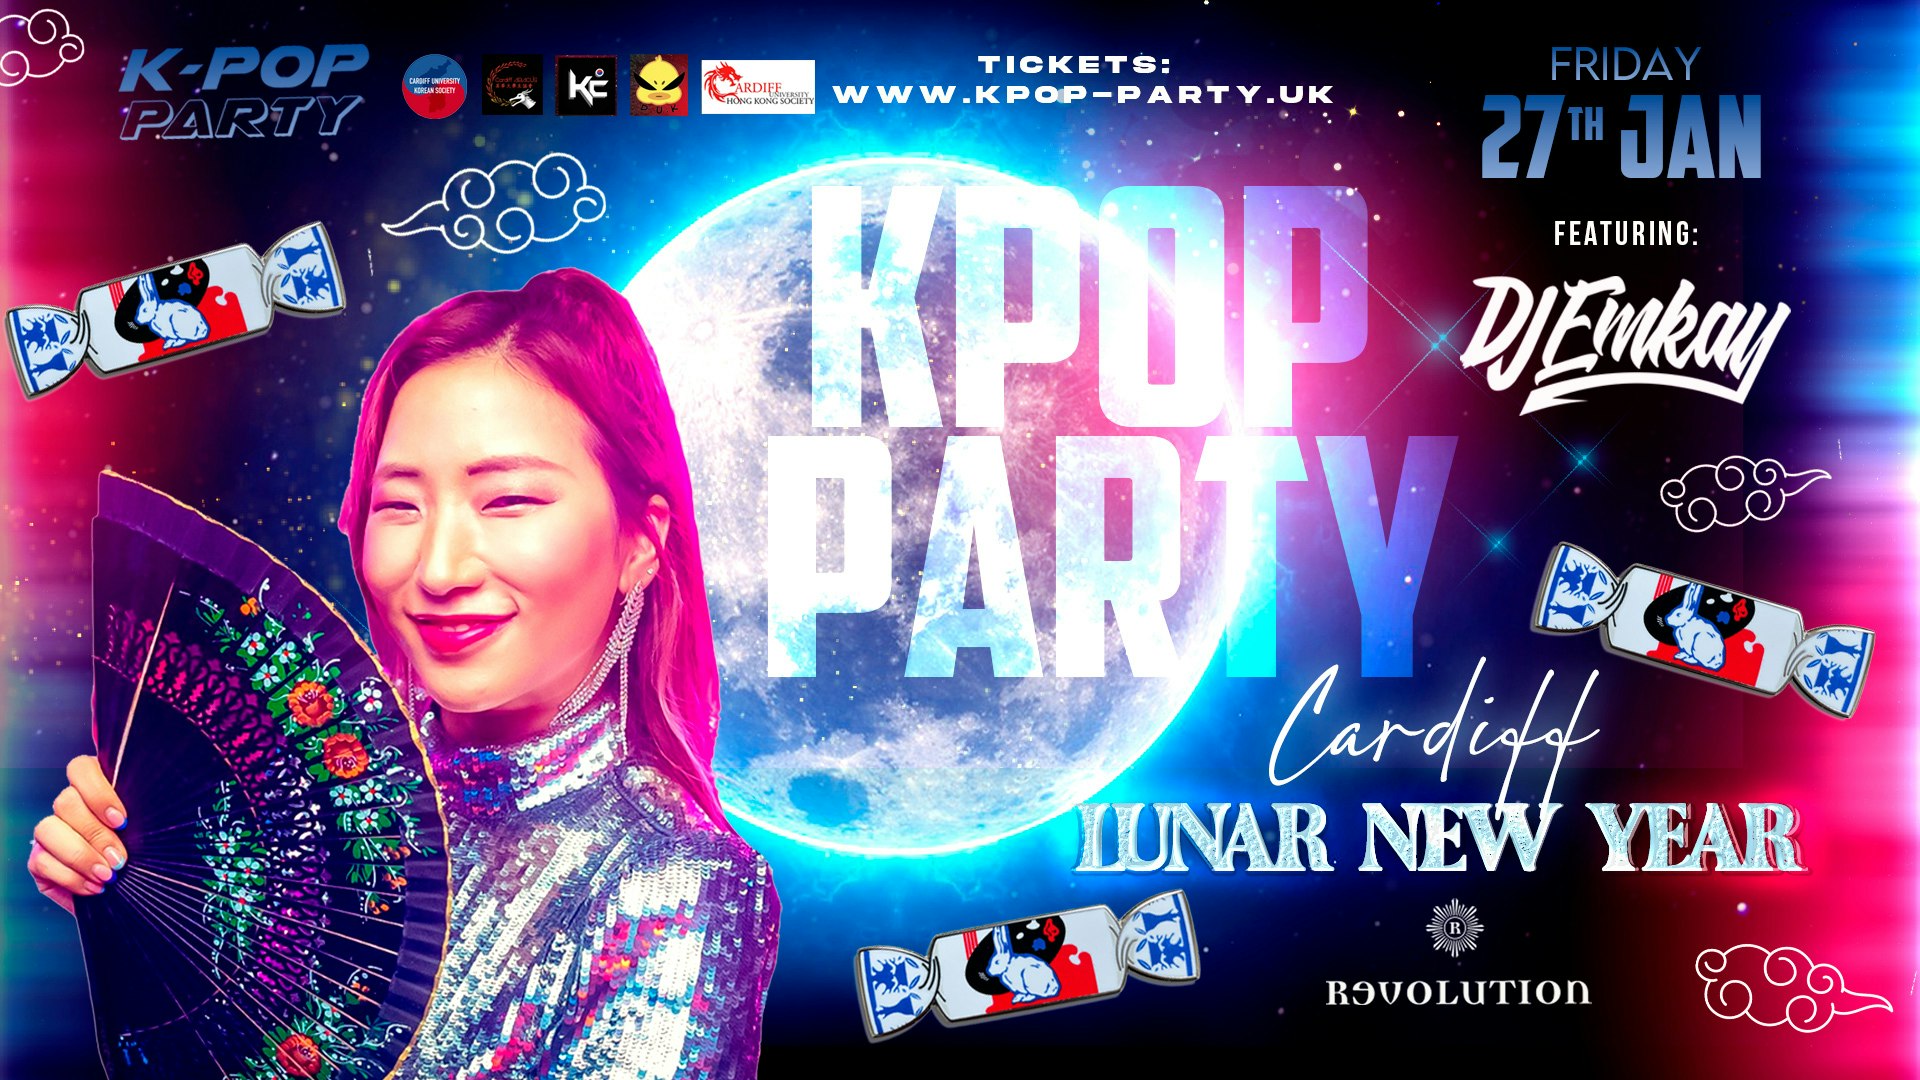 K-Pop Party Cardiff : LUNAR NEW YEAR with DJ EMKAY | Friday 27th January